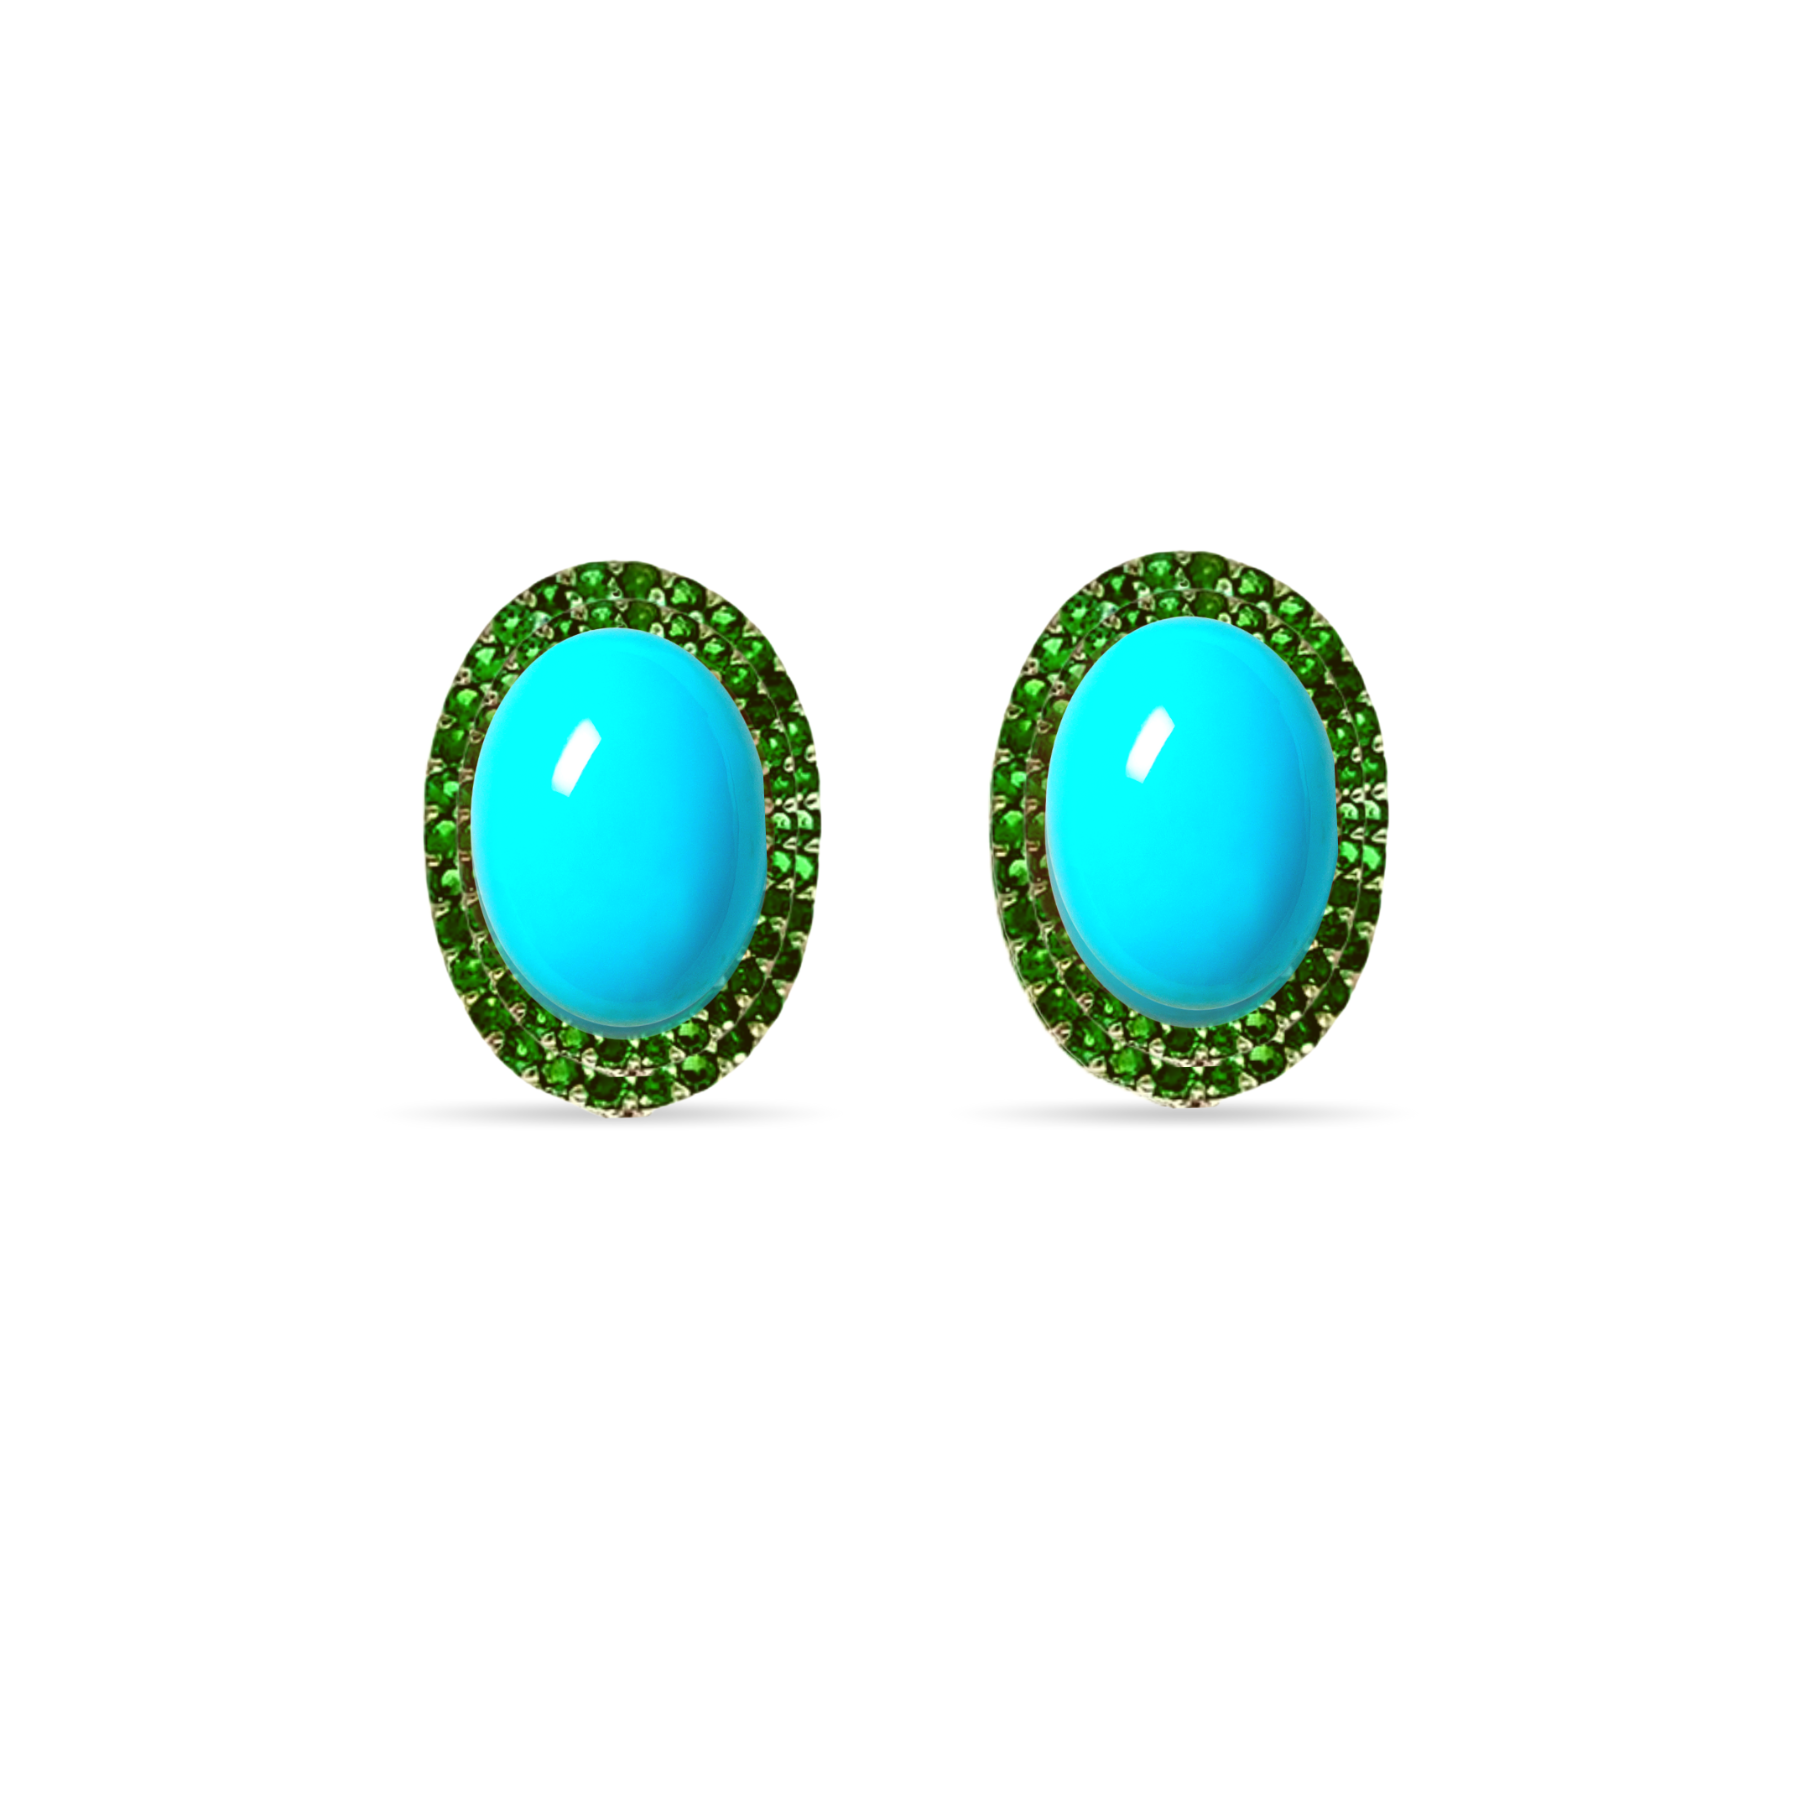 Margoret Chrome Diopside & Turquoise 18ct Gold Oval Stud Earrings Retro Glam Margot Fox